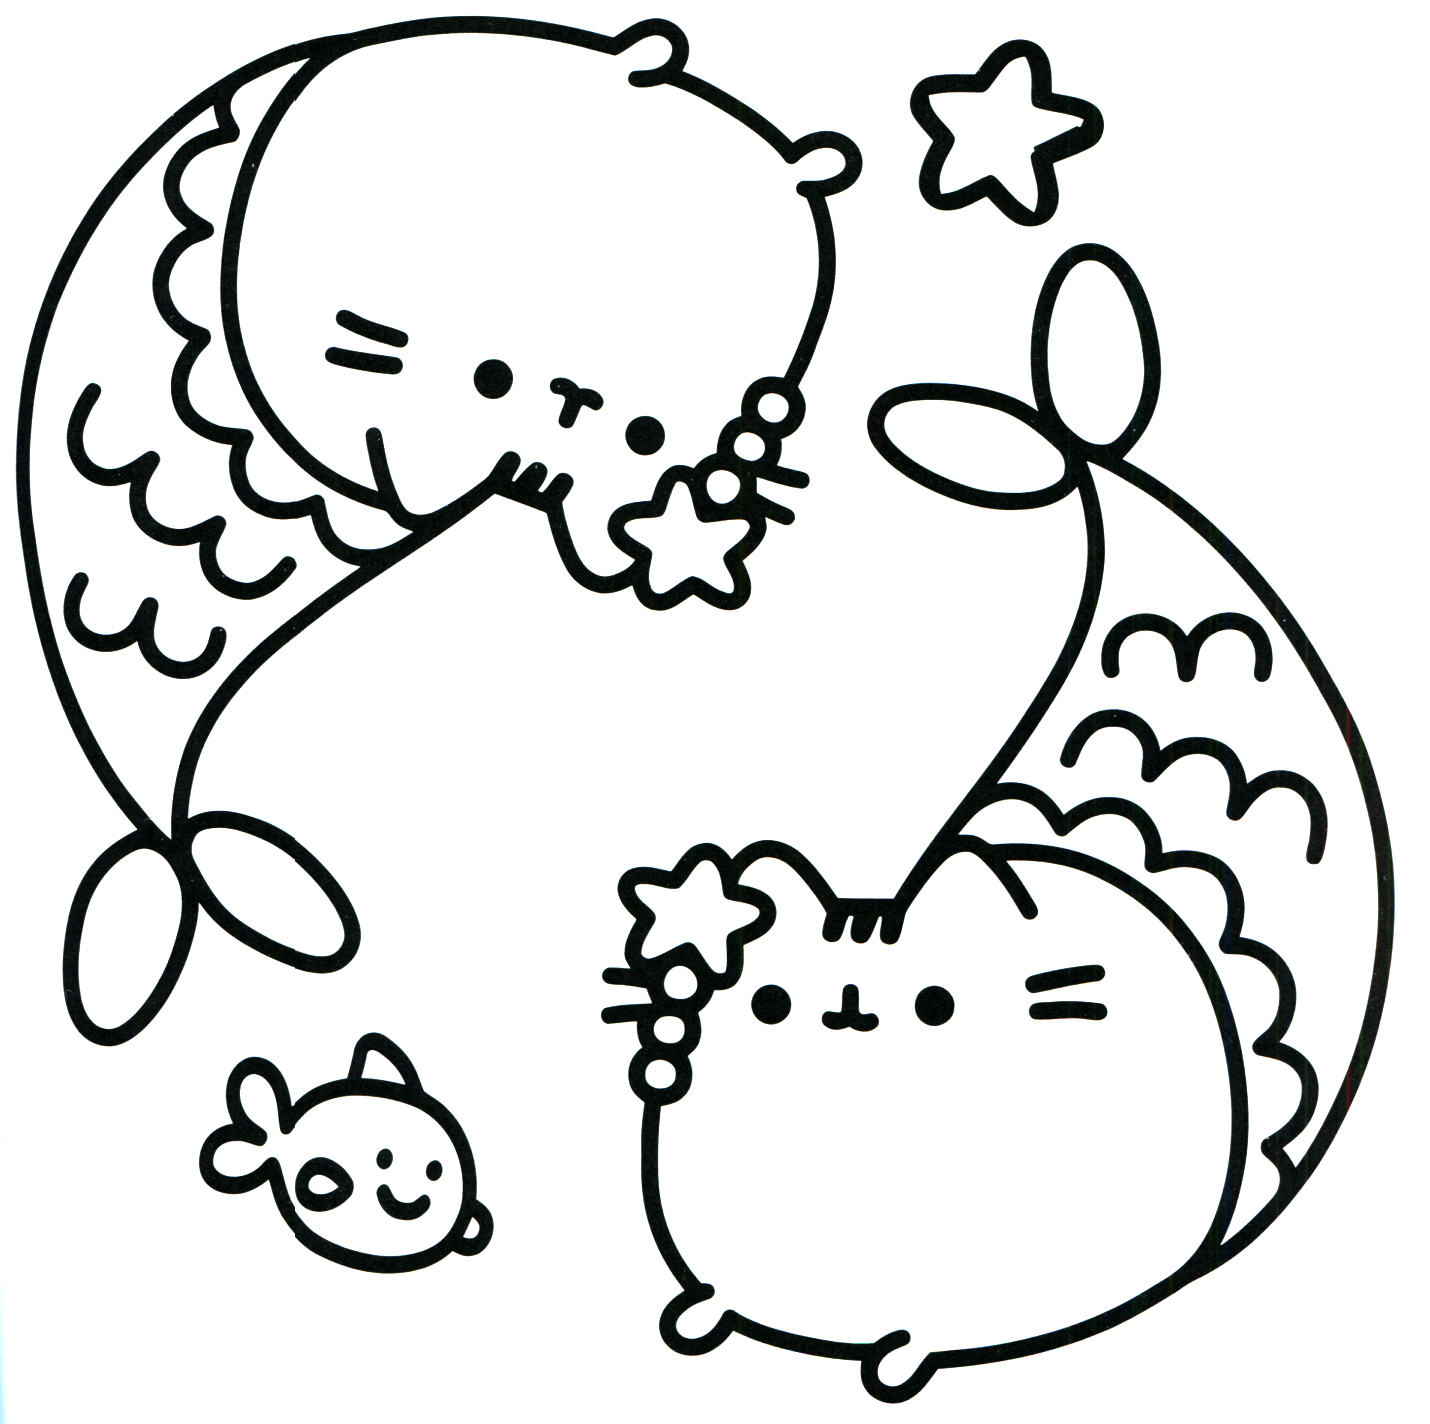 Two cat mermaid Coloring Pages - Pusheen Coloring Pages - Coloring Pages  For Kids And Adults